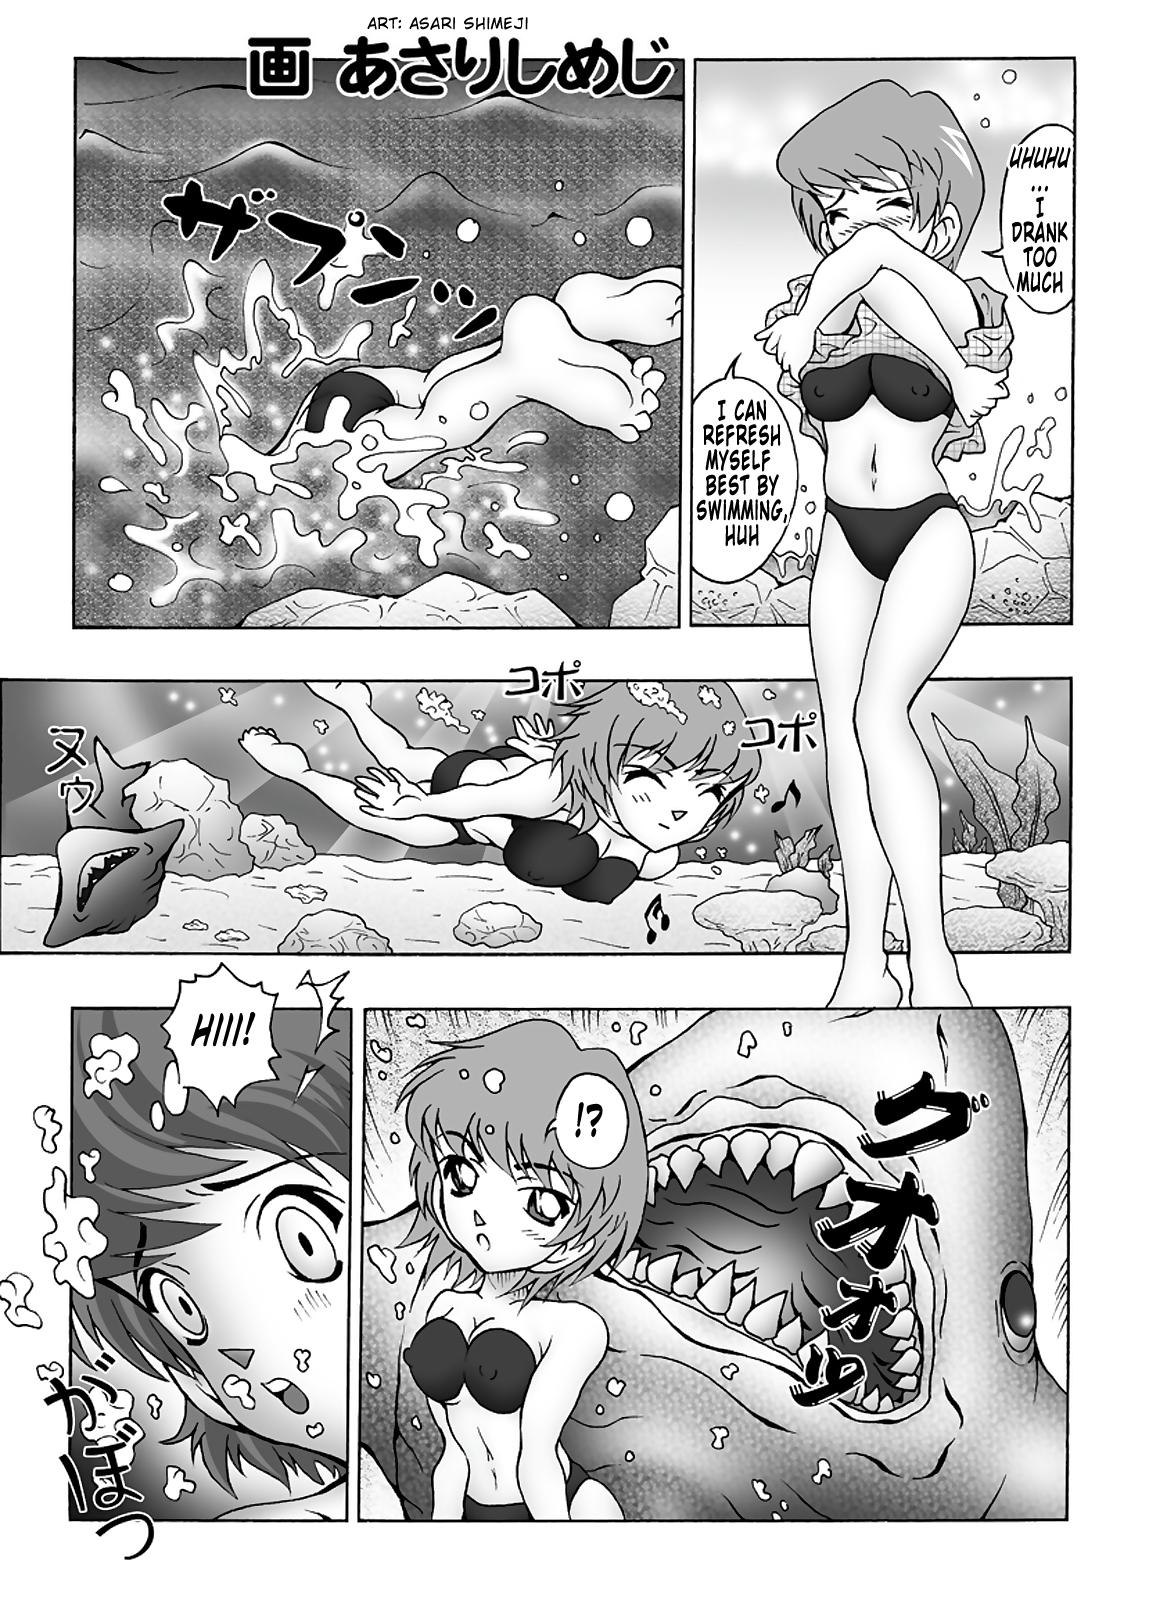 Tight Pussy Porn Bumbling Detective Conan - File 9: The Mystery Of The Jaws Crime - Detective conan Cfnm - Page 4